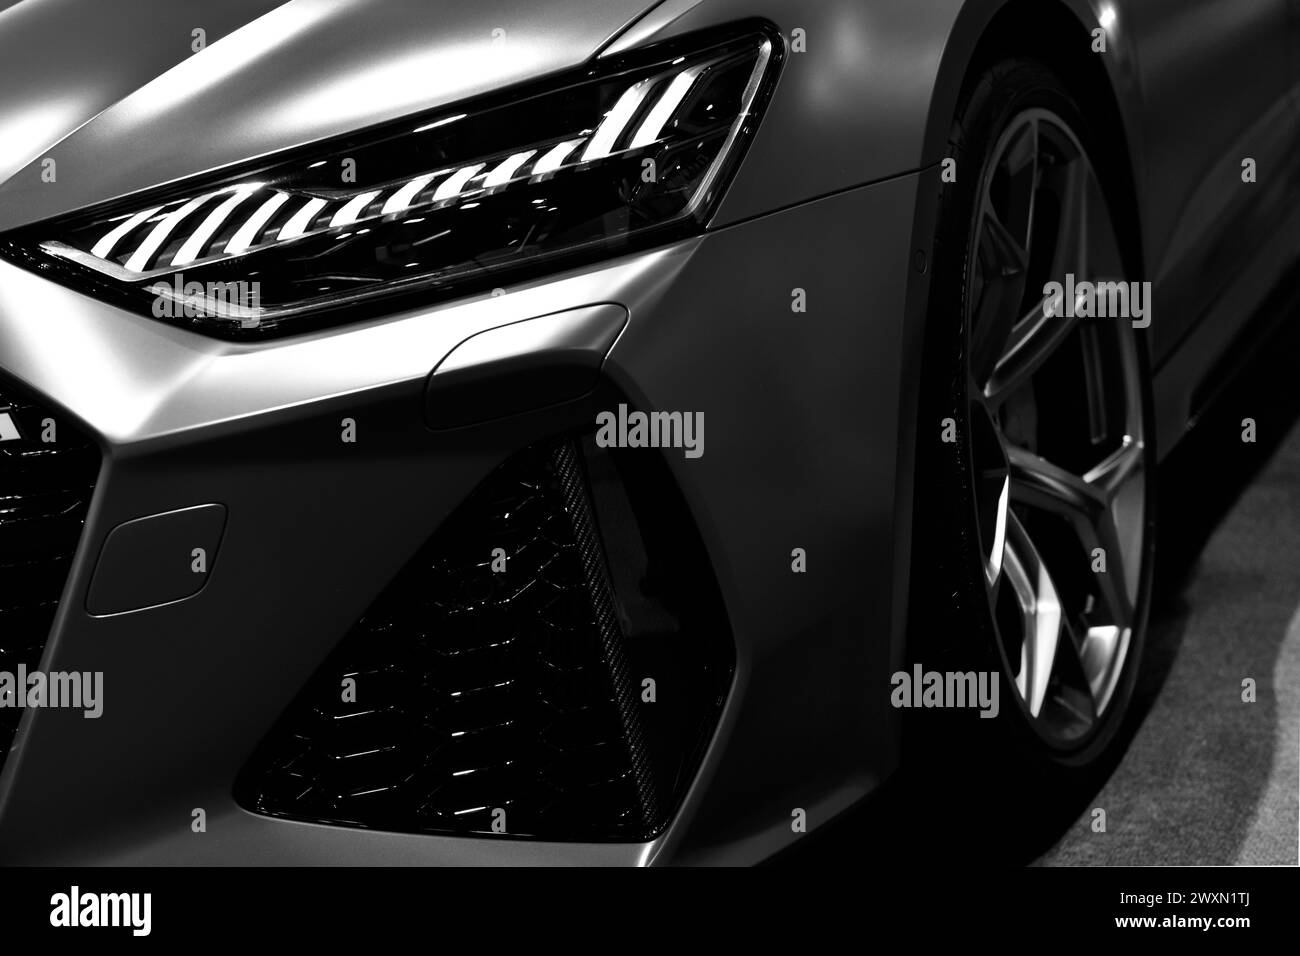 Front view of LED headlights sport car Stock Photo